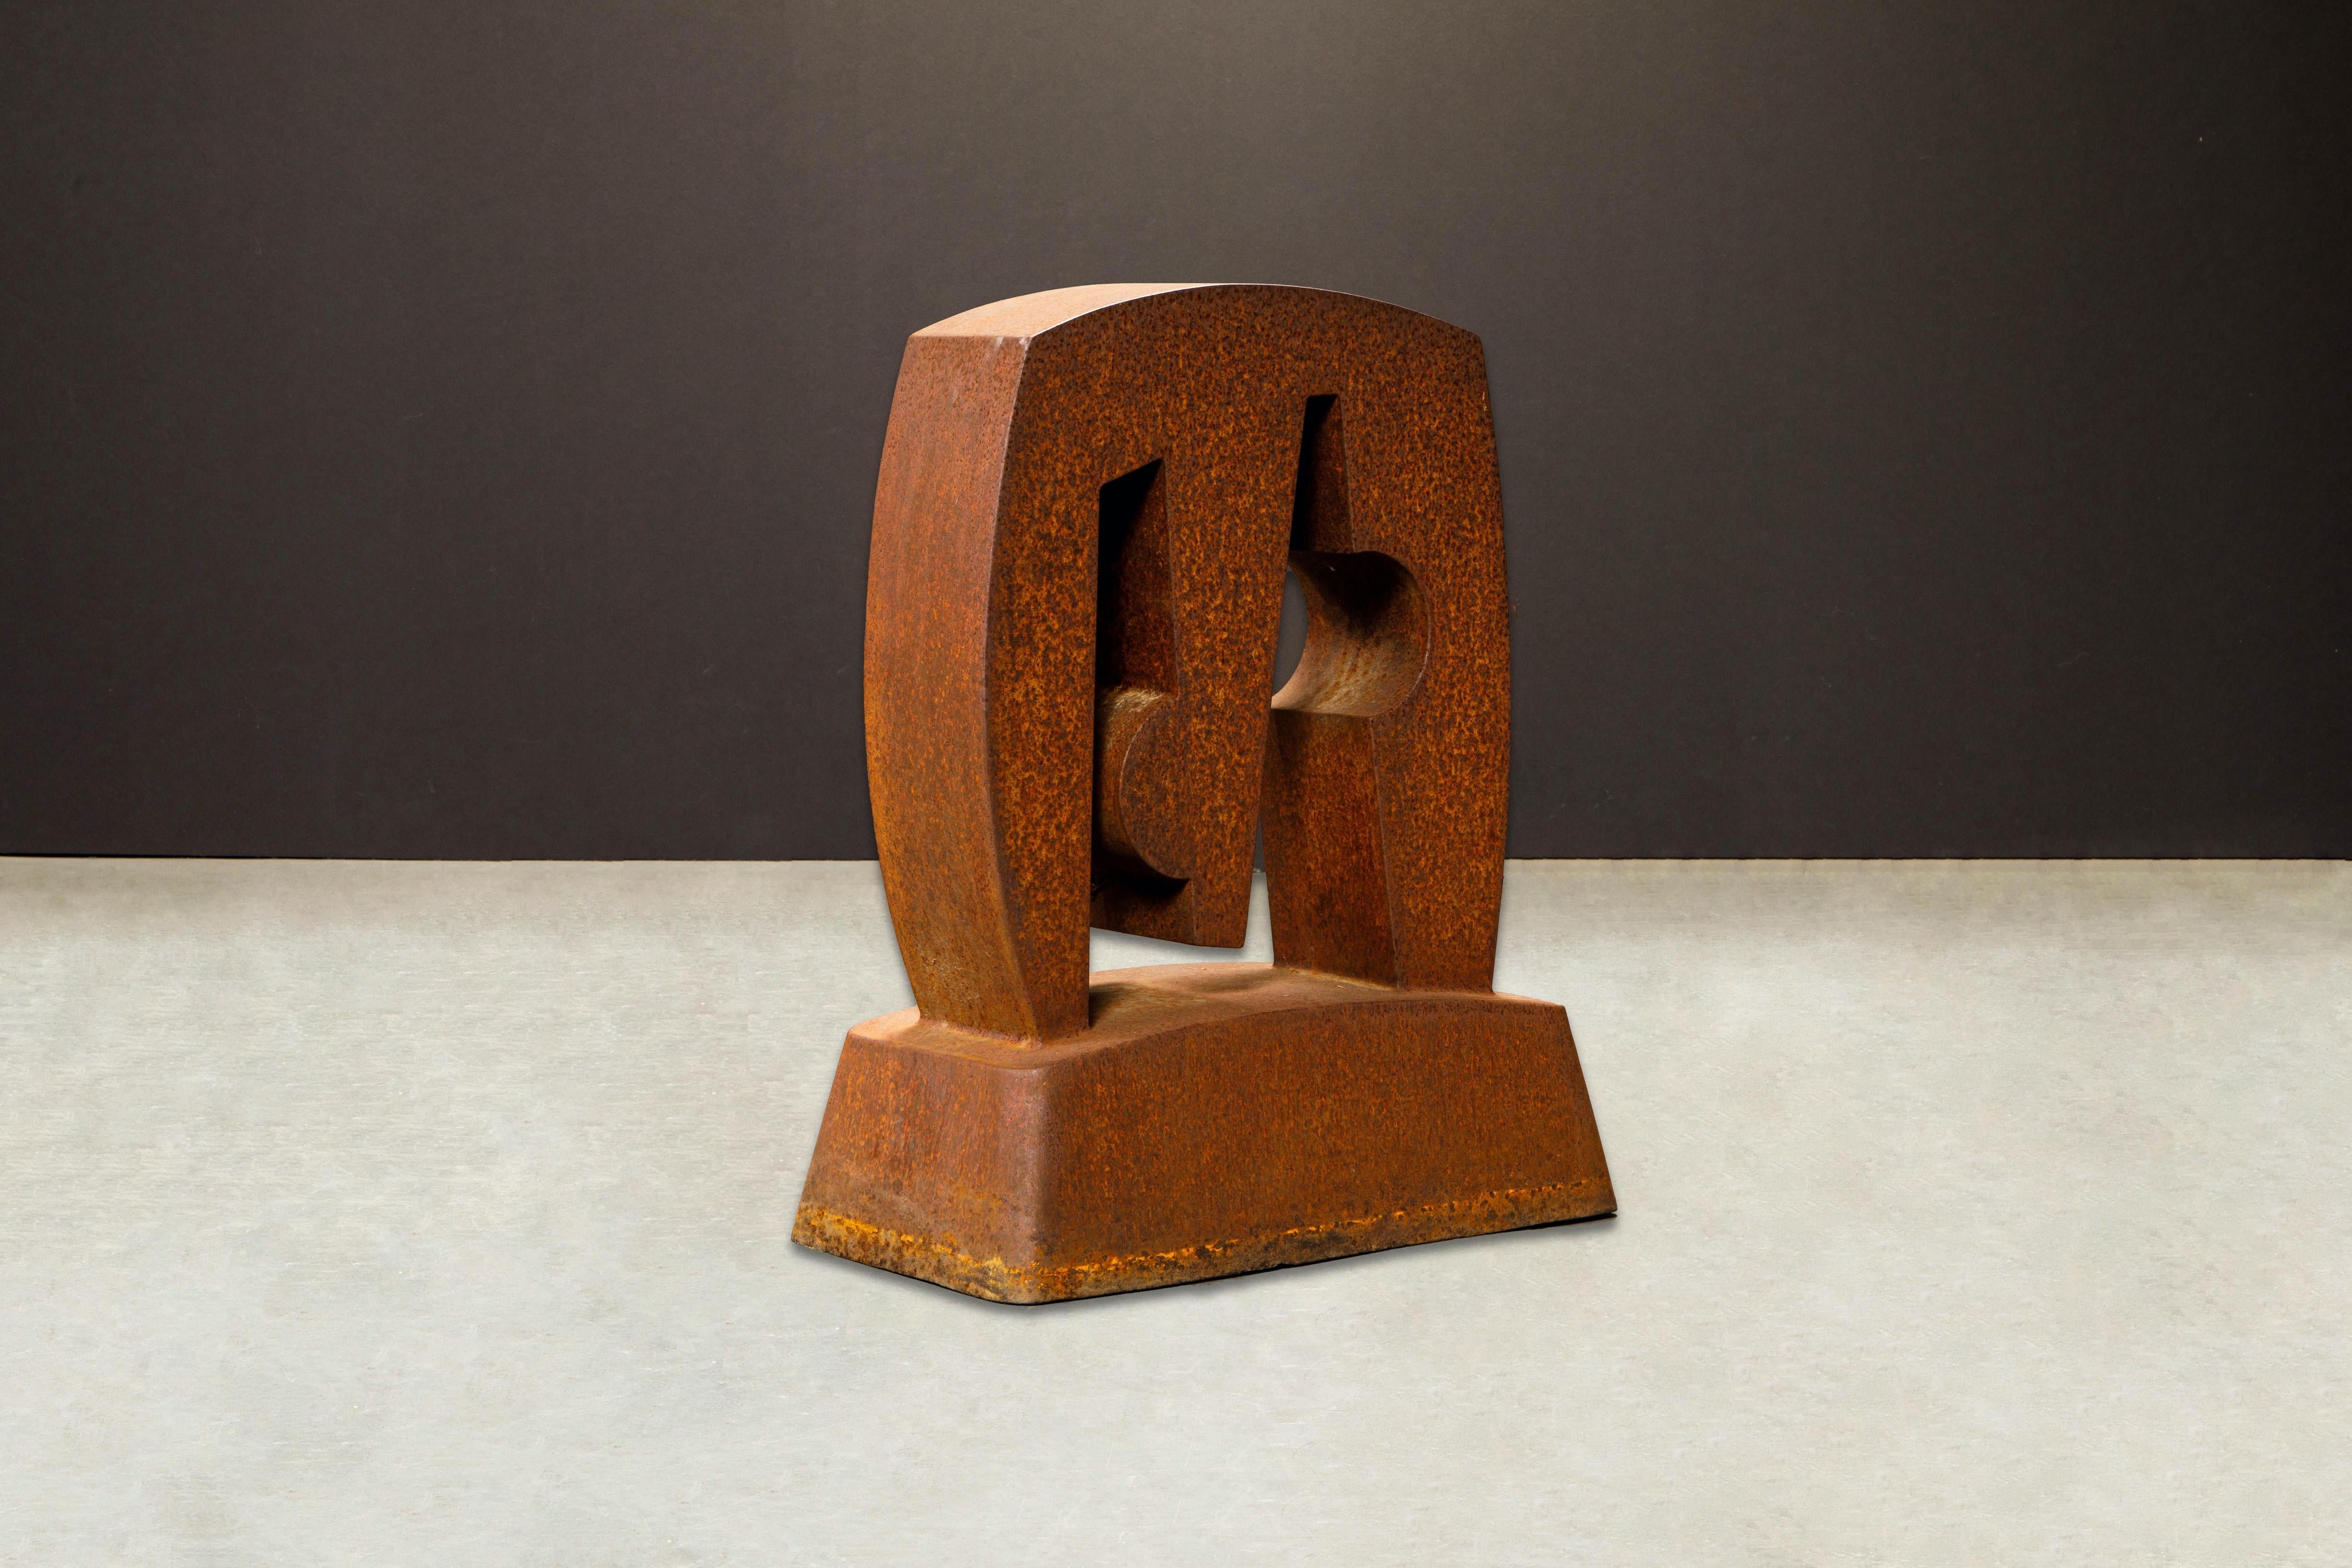 Post-Modern Patinated Steel Sculpture by Arnie Garborg, Signed and Dated 1997